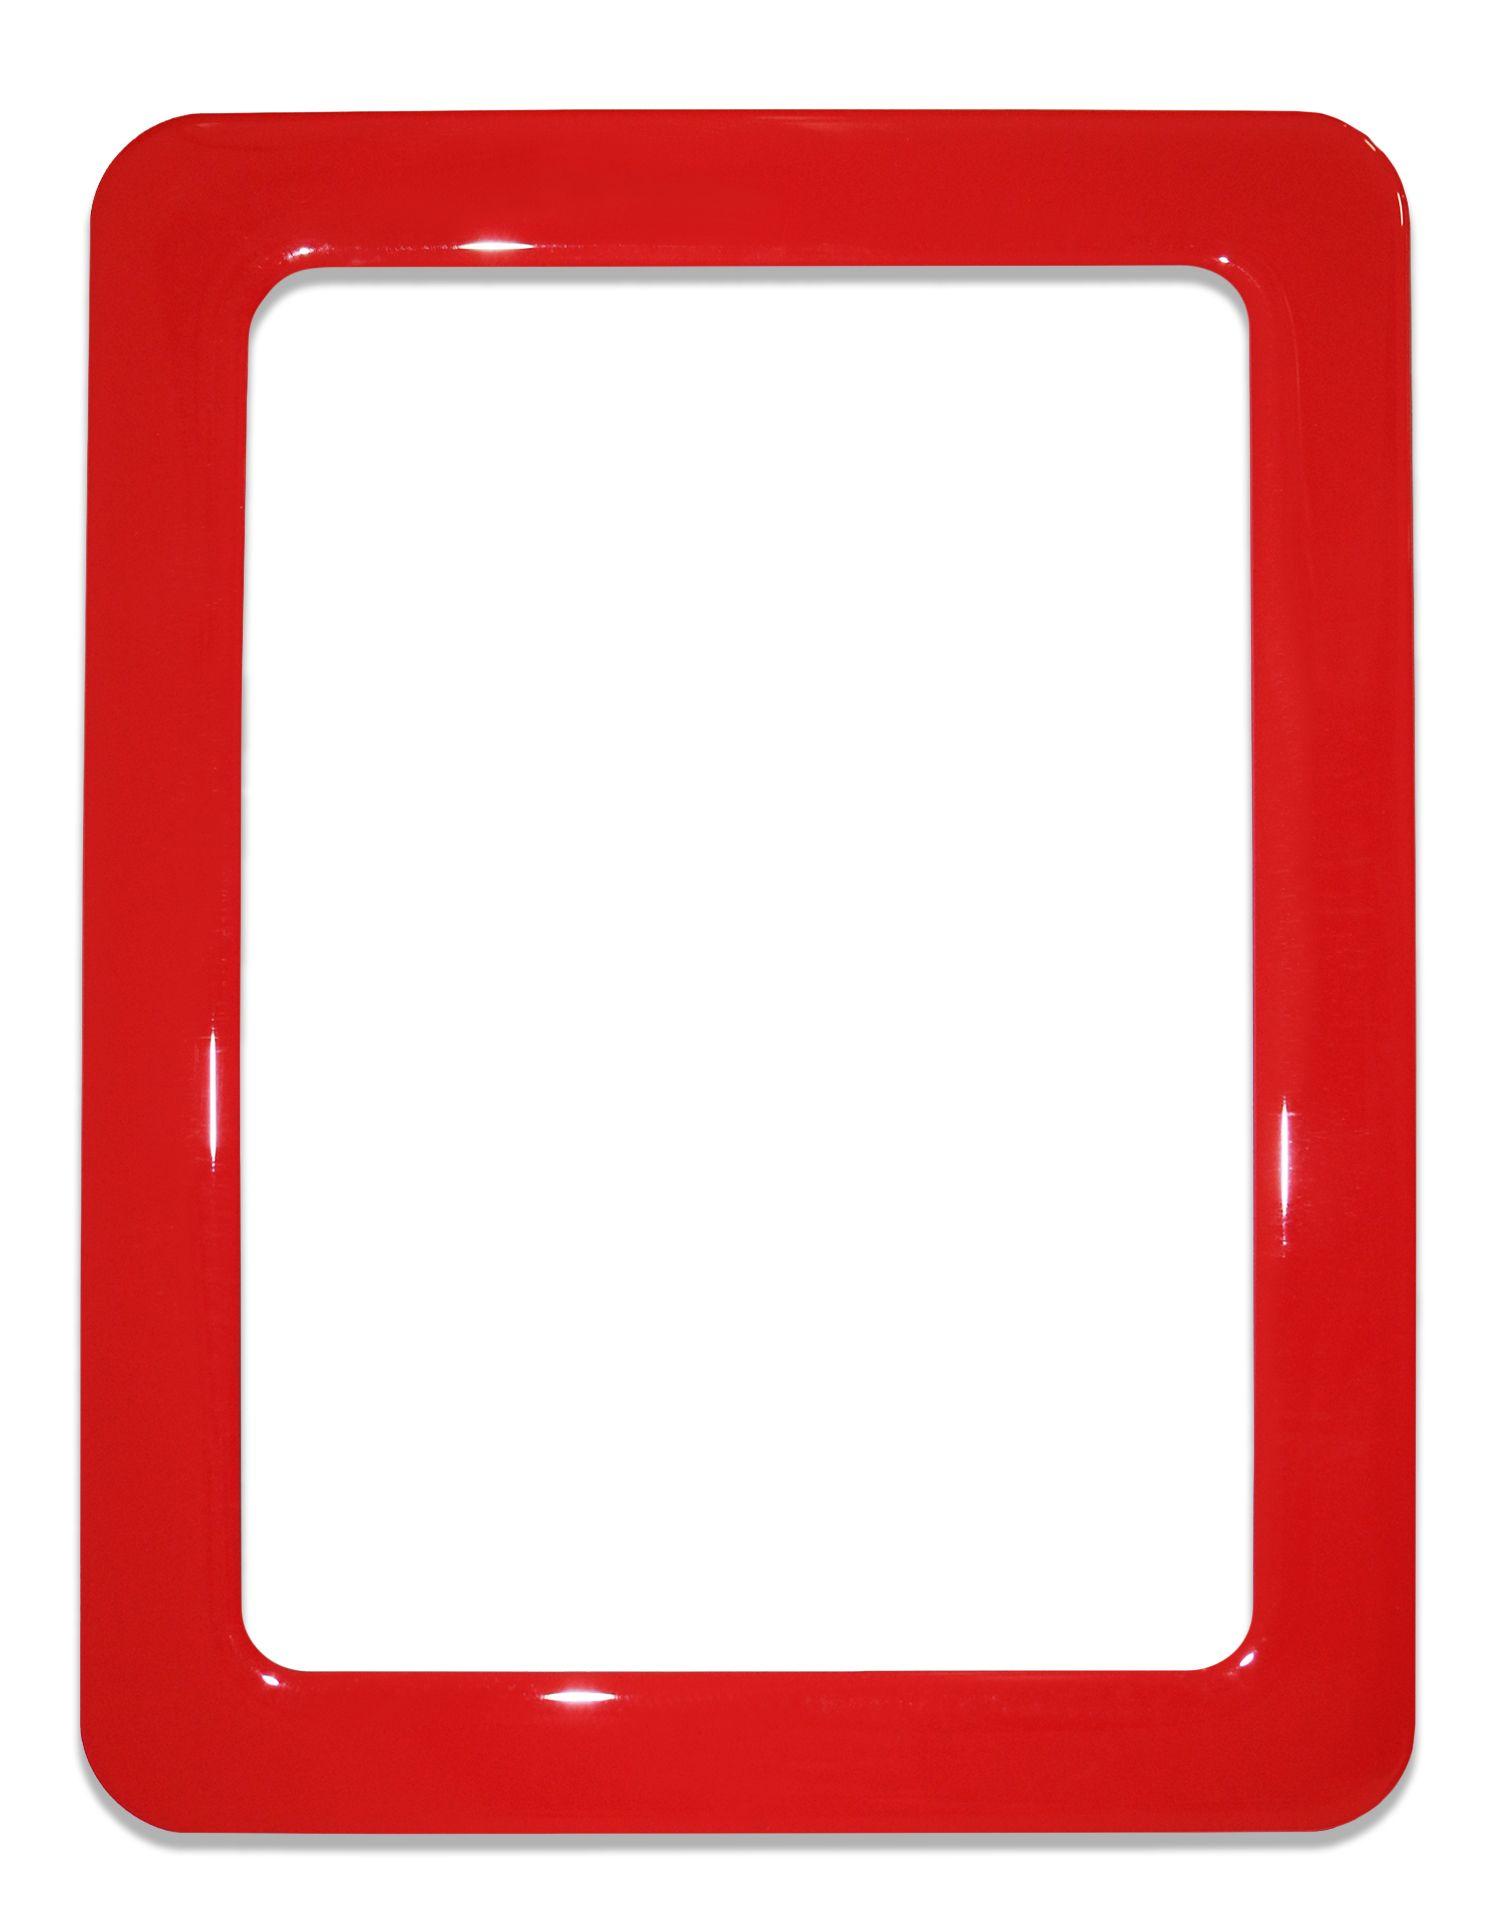 Magnetic self-adhesive frame size 16.0x11.8cm - red